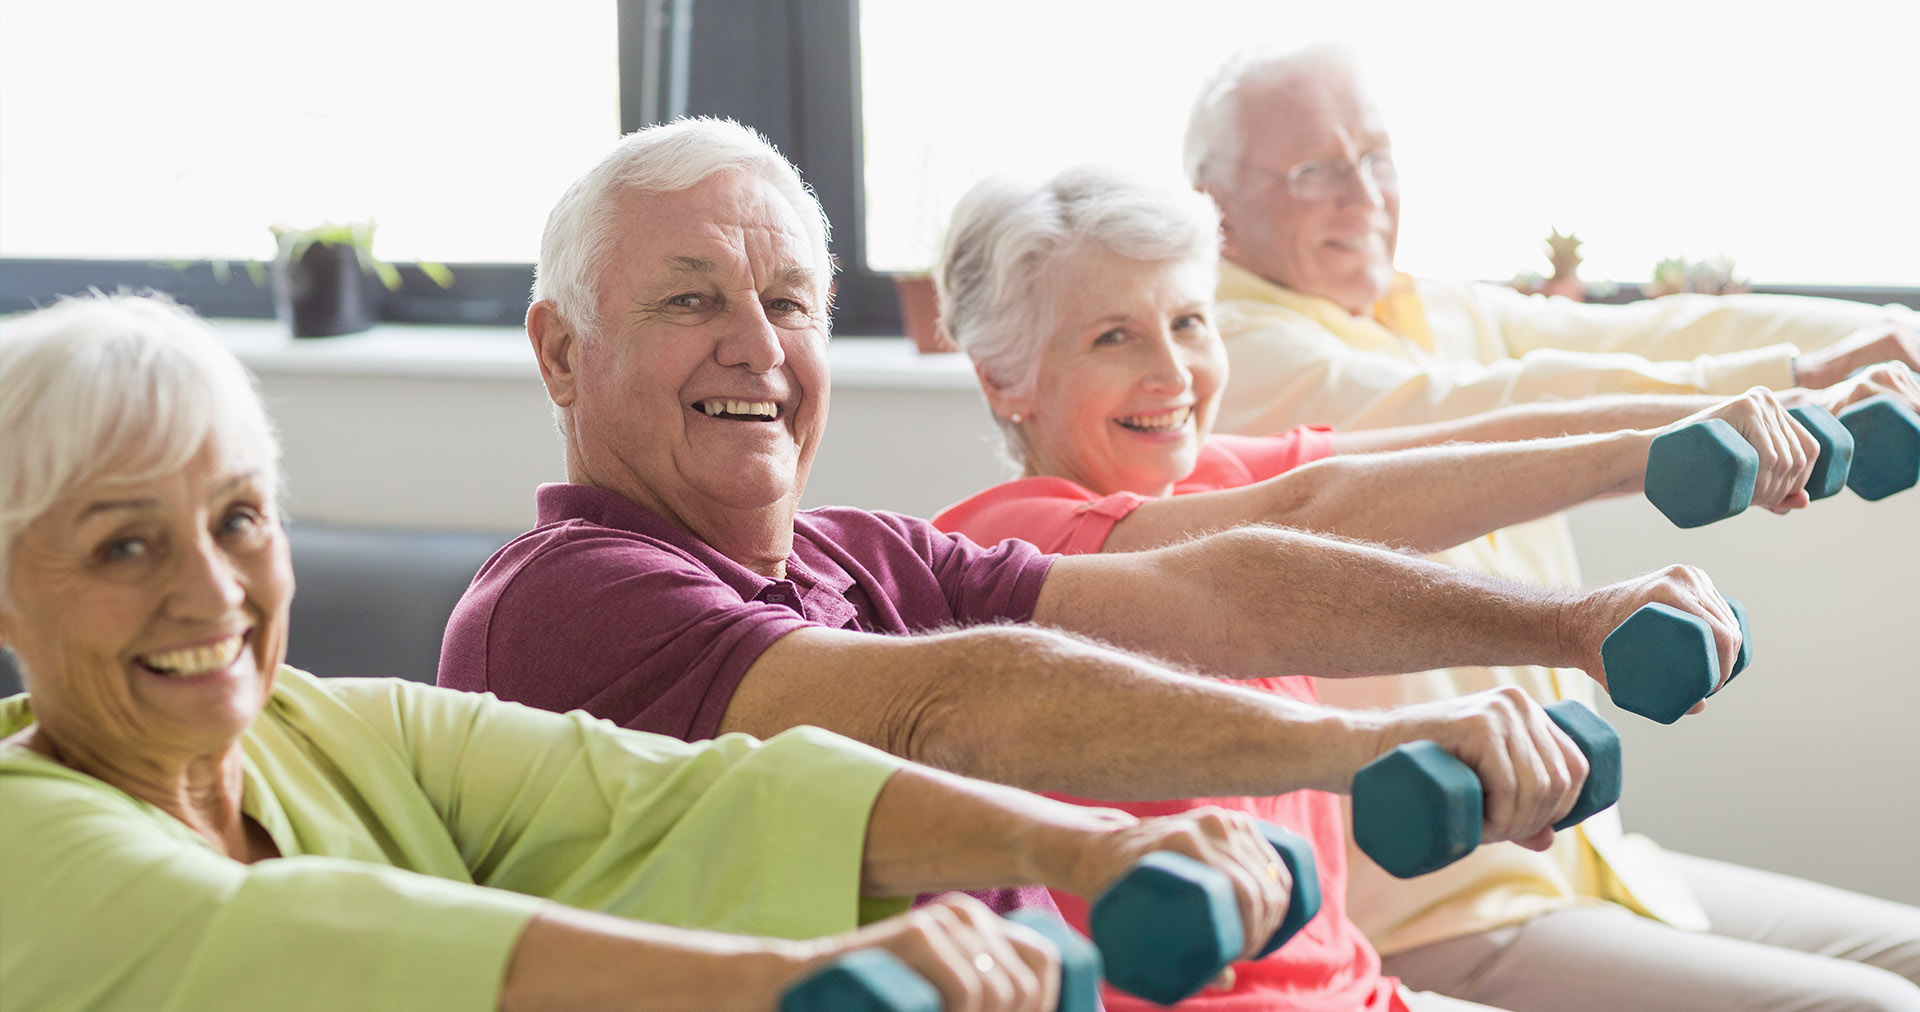 Senior Home Fitness Training  Personal Fitness Training for Older Adults